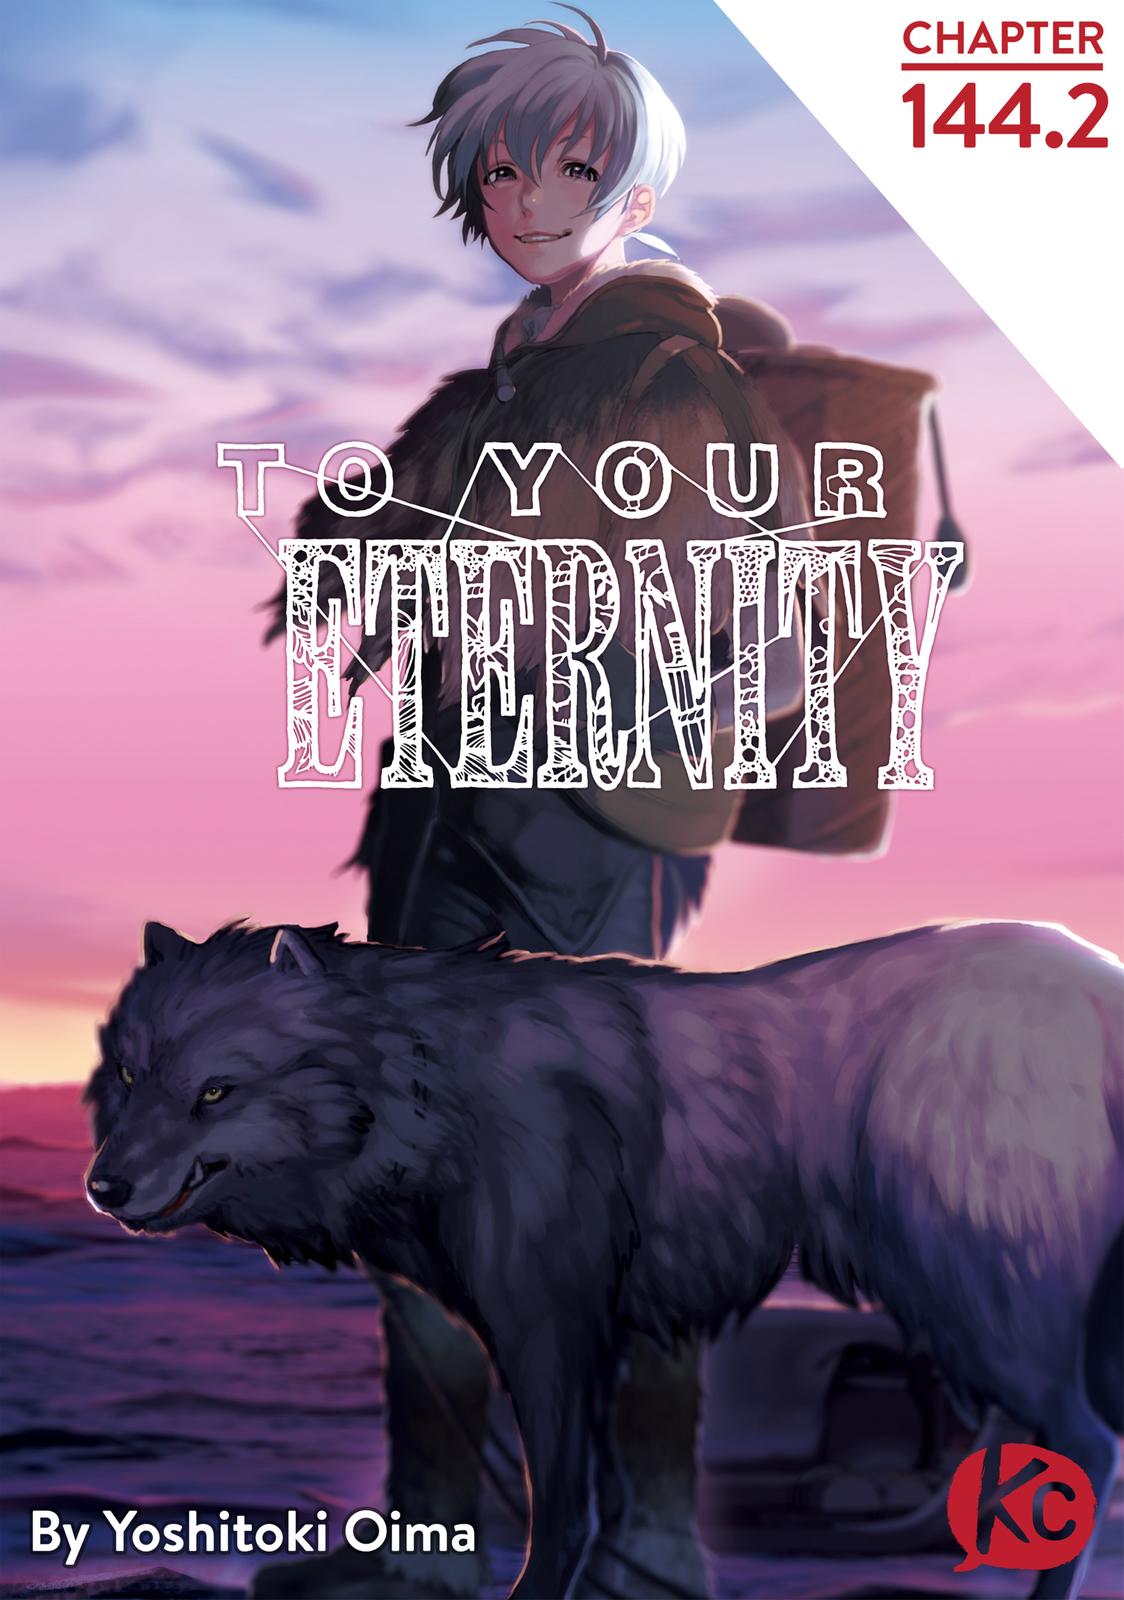 to your eternity, to your eternity manga, read to your eternity, read to your eternity manga, to your eternity anime, to your eternity anime release date, to your eternity wiki, to your eternity characters, to your eternity anime adaptation, to your eternity episode 1, to your eternity fushi, to your eternity review, to your eternity tv tropes, to your eternity myanimelist, to your eternity release date, to your eternity anime episode 1, to your eternity anime studio, to your eternity about, to your eternity amazon, to your eternity anime trailer, to your eternity anime reddit, to your eternity anime characters, to your eternity box set, to your eternity baka, to your eternity barnes and noble, to your eternity buy, to your eternity bon, to your eternity boy, to your eternity band 11, to your eternity band 3, but steps to your eternity meaning, to your eternity band 12, to your eternity crunchyroll, to your eternity chapter, to your eternity cast, to your eternity comixology, to your eternity comic, to your eternity cover, fumetsu no anata e wiki, fumetsu no anata e mal, fumetsu no anata e voice actor, fumetsu no anata e delayed, fumetsu no anata e crunchyroll, fumetsu no anata e 120, read Fumetsu no Anata e, Fumetsu no Anata e manga, to your eternity dub, to your eternity discussion, to your eternity delay, to your eternity danke empire, to your eternity deutsch, to your eternity episode 1 release date, to your eternity nombre de tomes, to your eternity anime date, to your eternity ep 1, to your eternity ending, to your eternity eko, to your eternity episodes, to your eternity english, to your eternity español, to your eternity egmont, to your eternity manga ending,